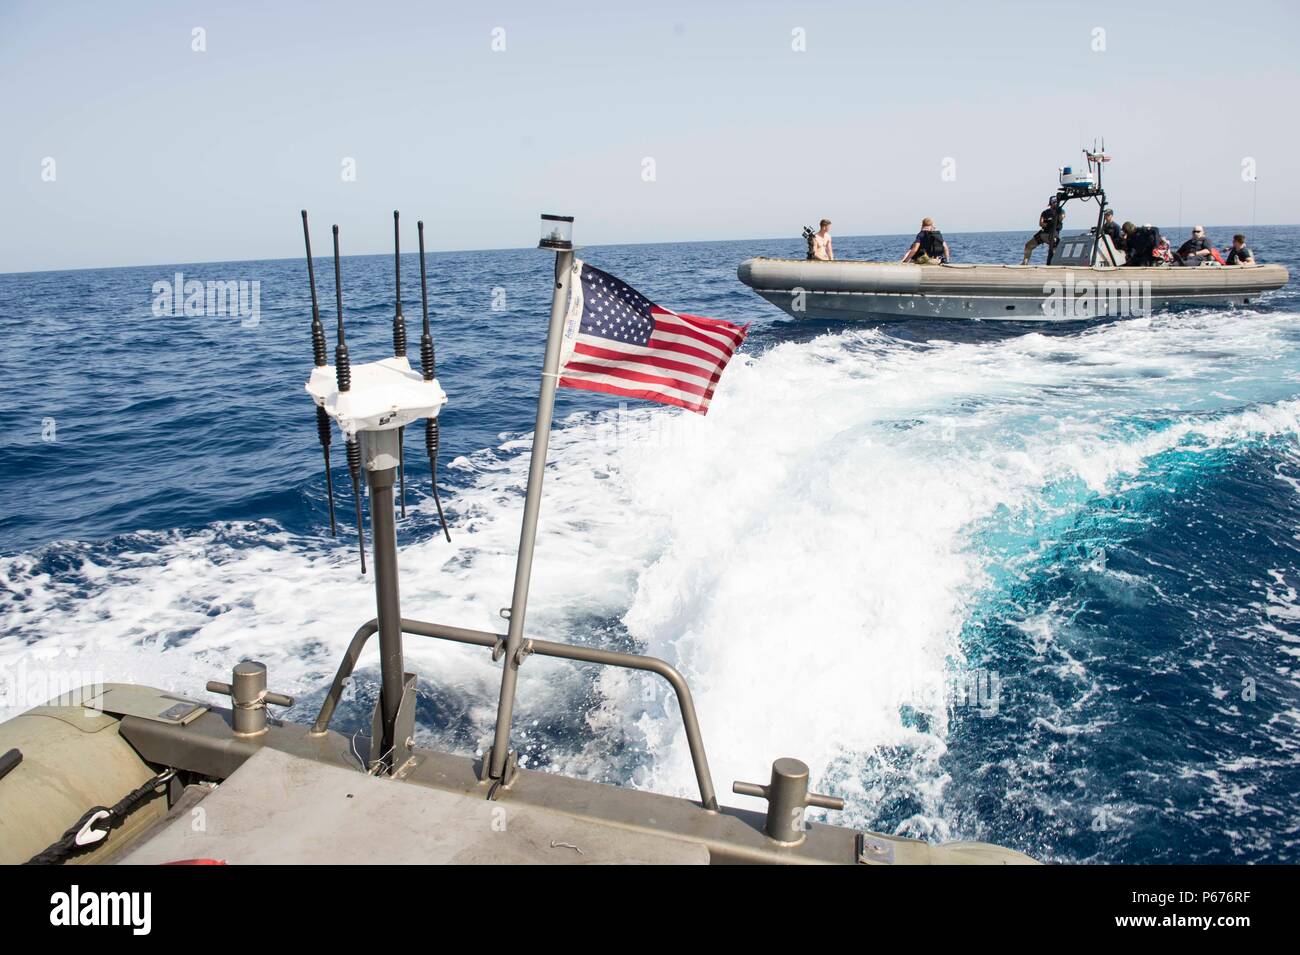 160516-N-VS214-199  RED SEA (May 16, 2016) A seven-meter rigid hull inflatable boat (RHIB) maneuvers in front of an 11-meter RHIB during a small boat training exercise for the boat crews of the dock landing ship USS Harpers Ferry (LSD 49). The crew of Harpers Ferry is part of about 3,000 U.S. military personnel – representing USCENTCOM headquarters and its components – who will participate in this year’s bilateral exercise, exercise Eager Lion 16, with the Jordan Armed Forces. (U.S. Navy photo by Mass Communication Specialist 3rd Class Zachary Eshleman/Released) Stock Photo